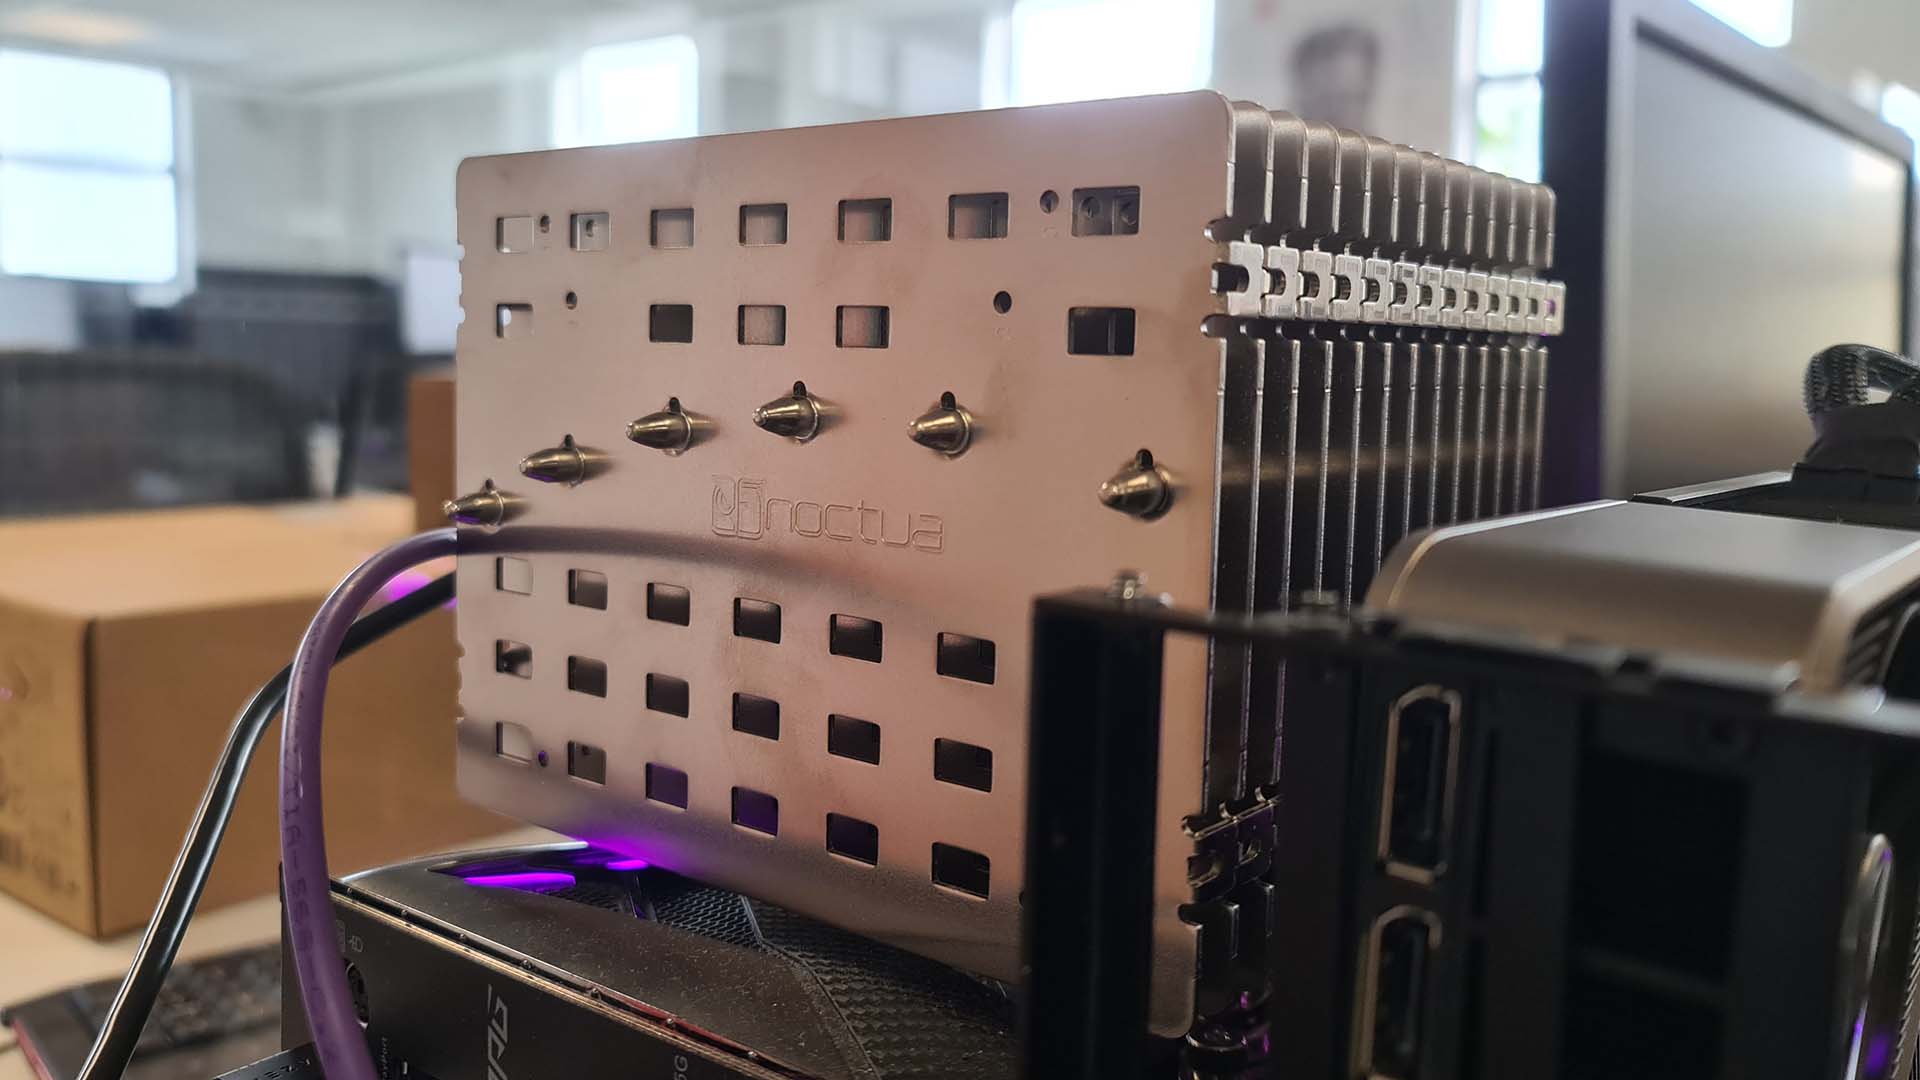 The Noctua NH-P1 air cooler mounted on an open-bed test bench with pink RGB lighting